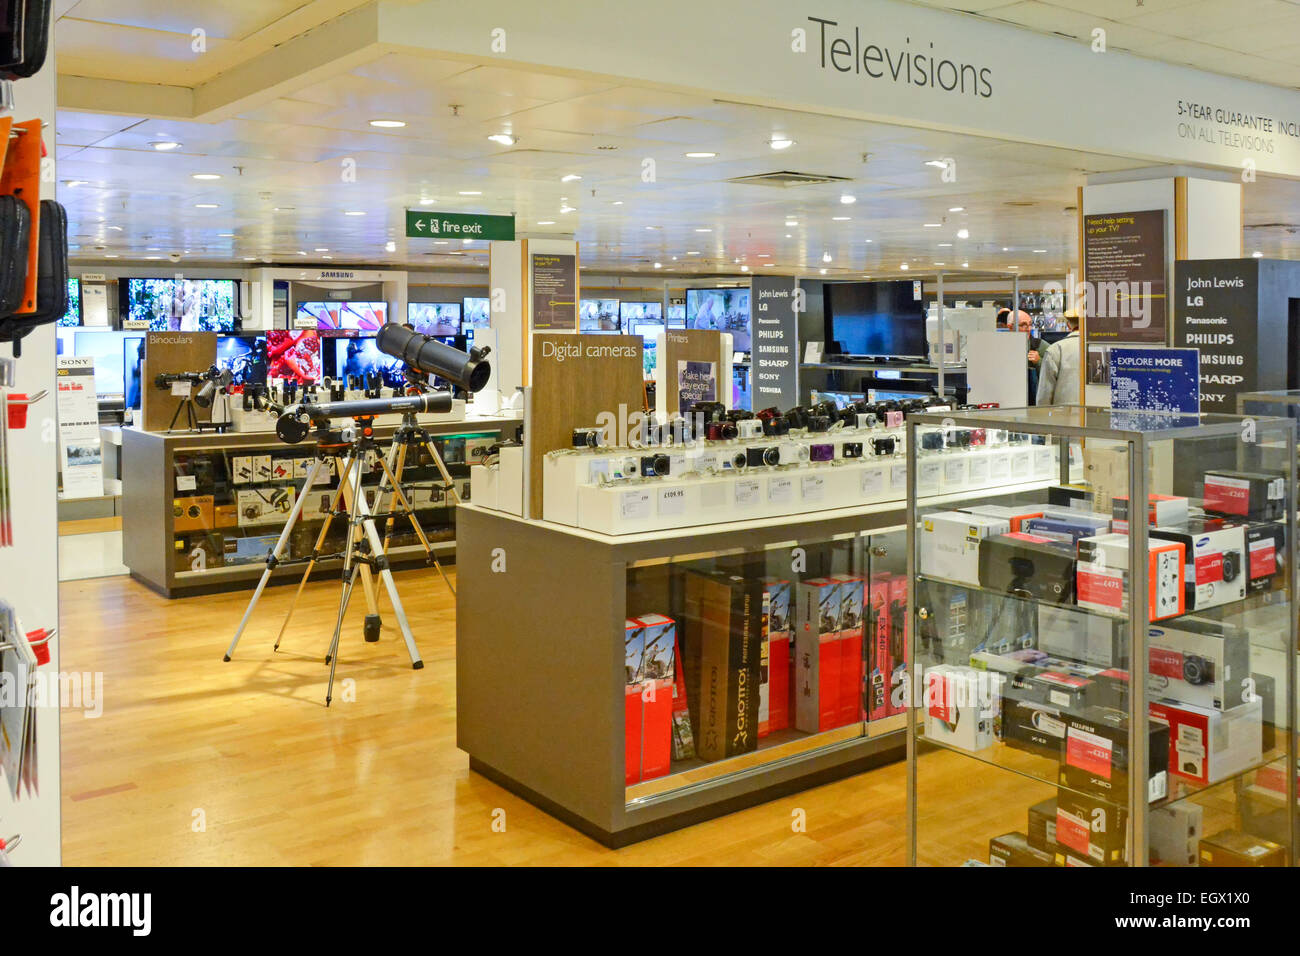 John Lewis retail business interior view of television & camera products in shopping department inside Oxford Street store West End London England UK Stock Photo